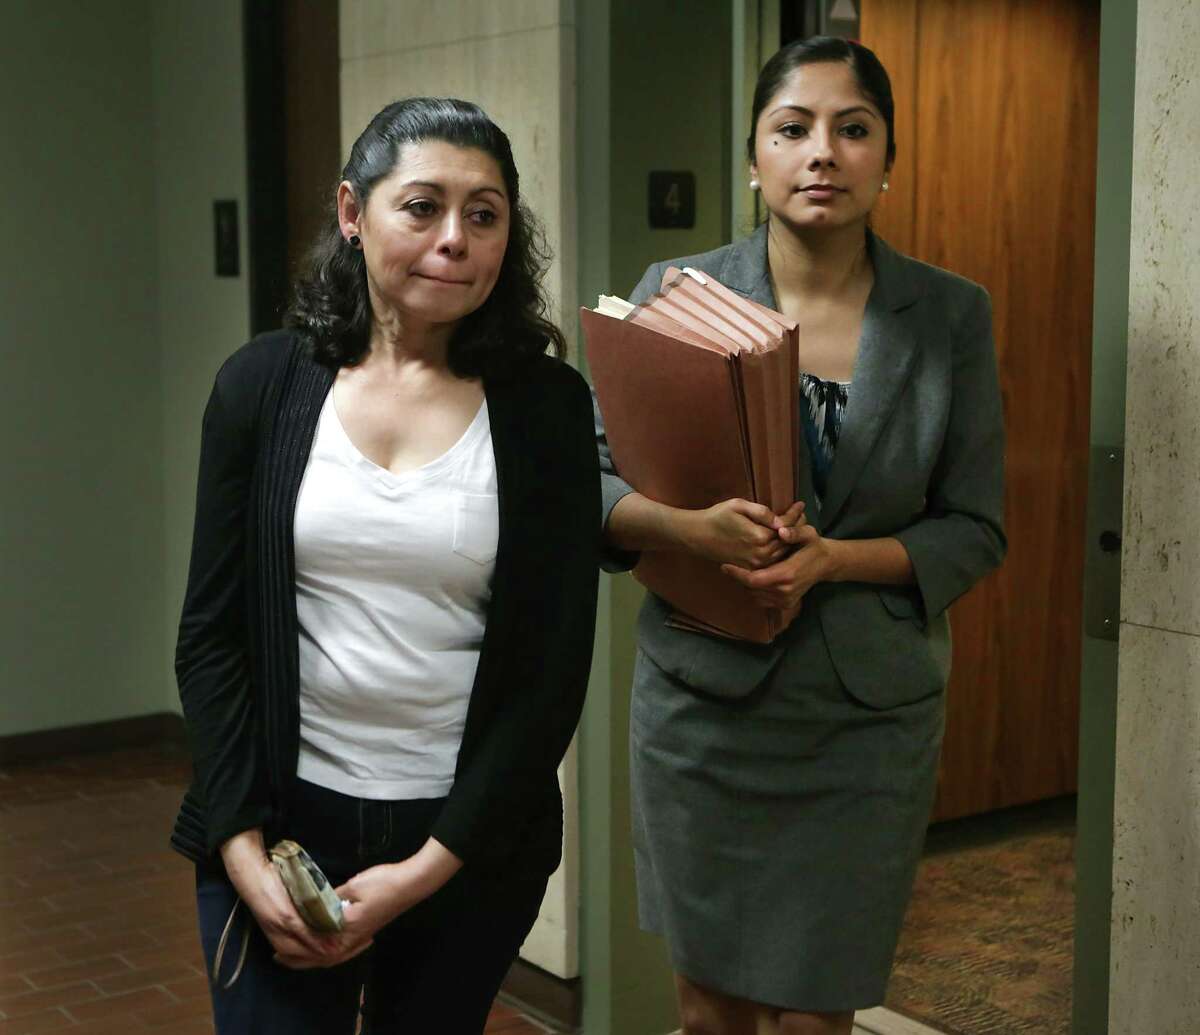 A distraught Lesly Cabrera, left, walks with Claudia Hernandez, her lawyer, following the judges decision in immigration court. Cabrera, a Honduran mother who is seeking asylum here due to gang violence aimed at her 17 year-old son while they were in San Pedro Sula, was denied application to asylum on May 18, 2015. Rejection will be more common with Attorney General Jeff Sessions’ decision to remove fear of domestic or gang violence as reasons to grant asylum.